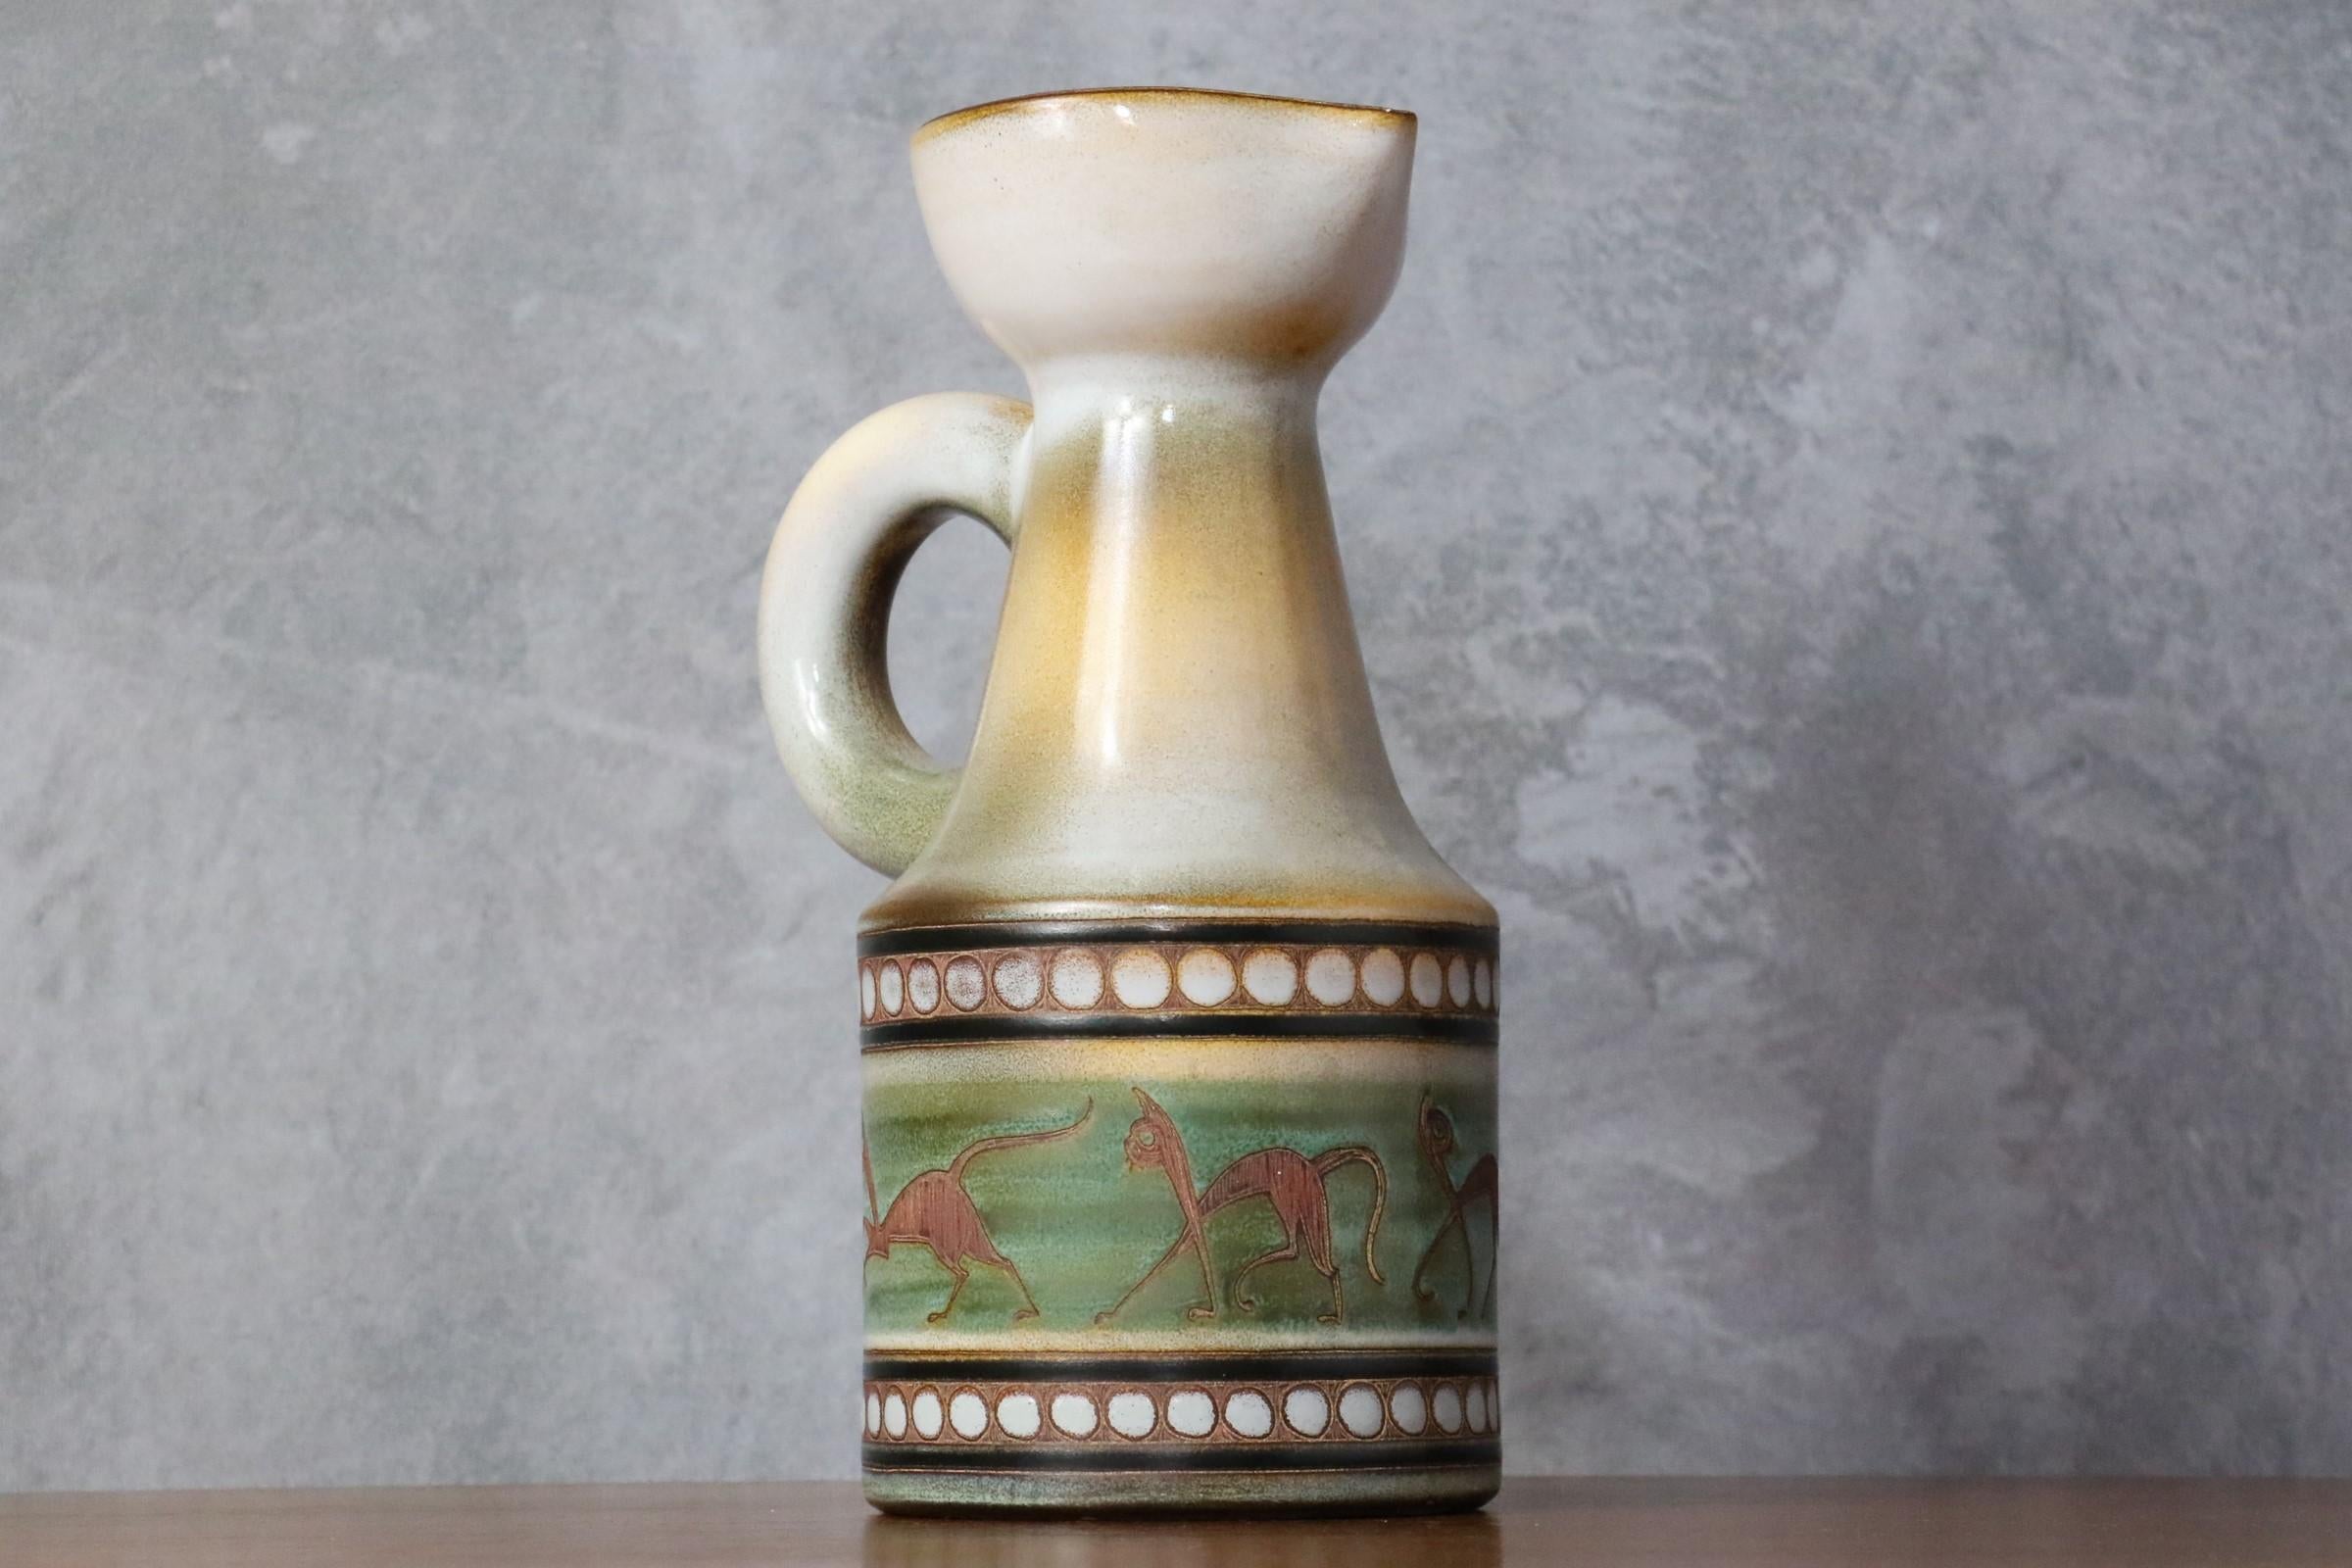 20th century French white ceramic pitcher by René Maurel, 1960's

The pitcher is glazed in a brilliant creamy white. It is decorated with a cats frieze with round motifs and colored in pale tones. 
It is signed under the base. 
It is in a very